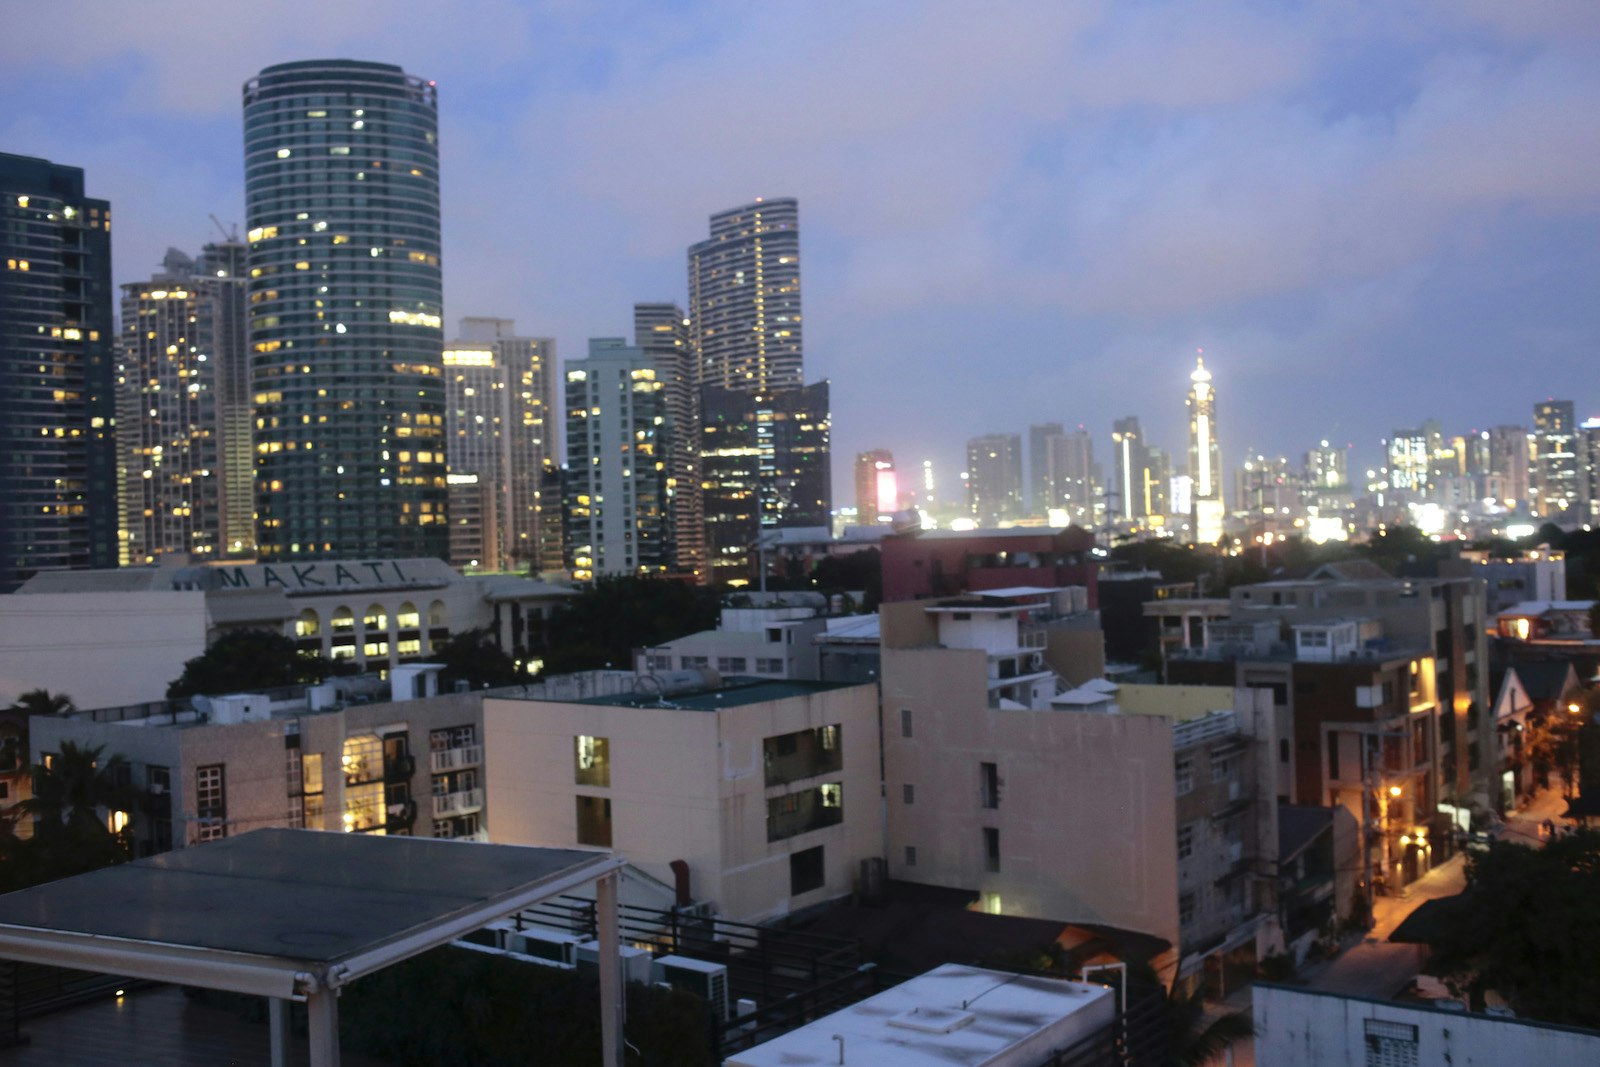 Rooftop view of Makait City at dusk with lit high-rises in the background and white cement buildings in the foreground